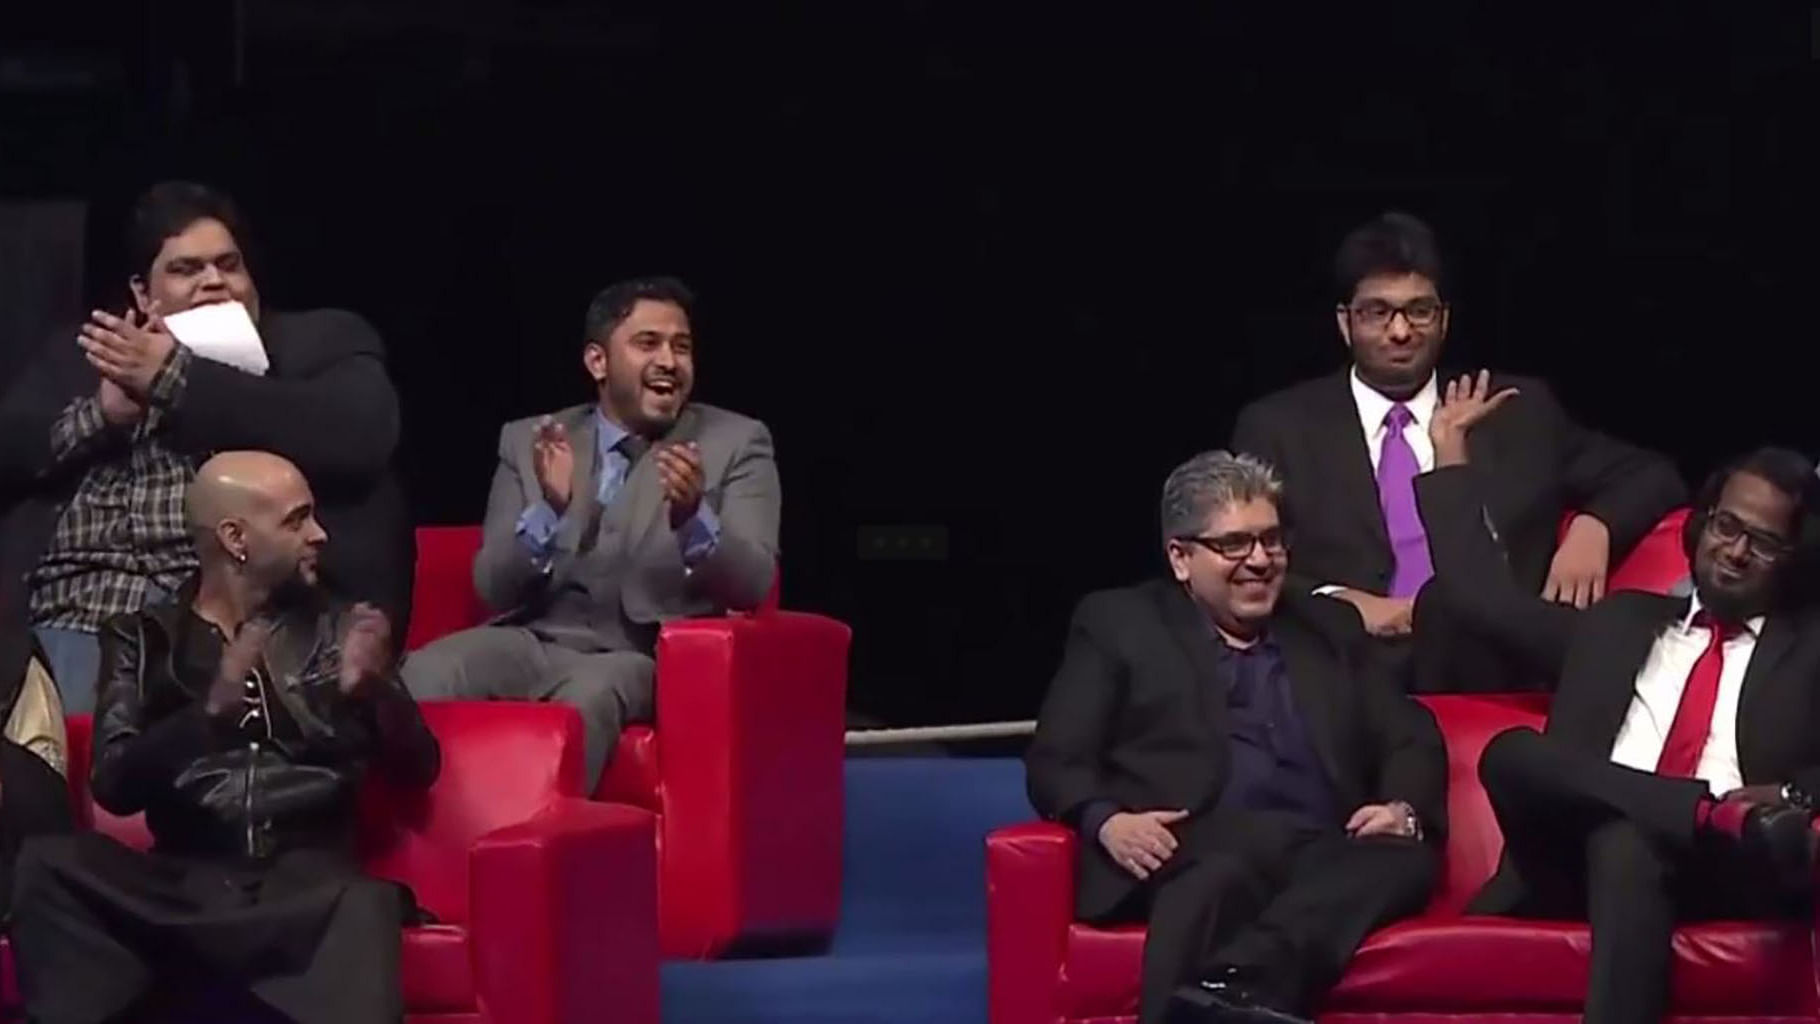 Screenshot from AIB’s Roast. (Photo: DailyMotion/<a href="http://www.dailymotion.com/video/x2fwnv3">AIB</a>)